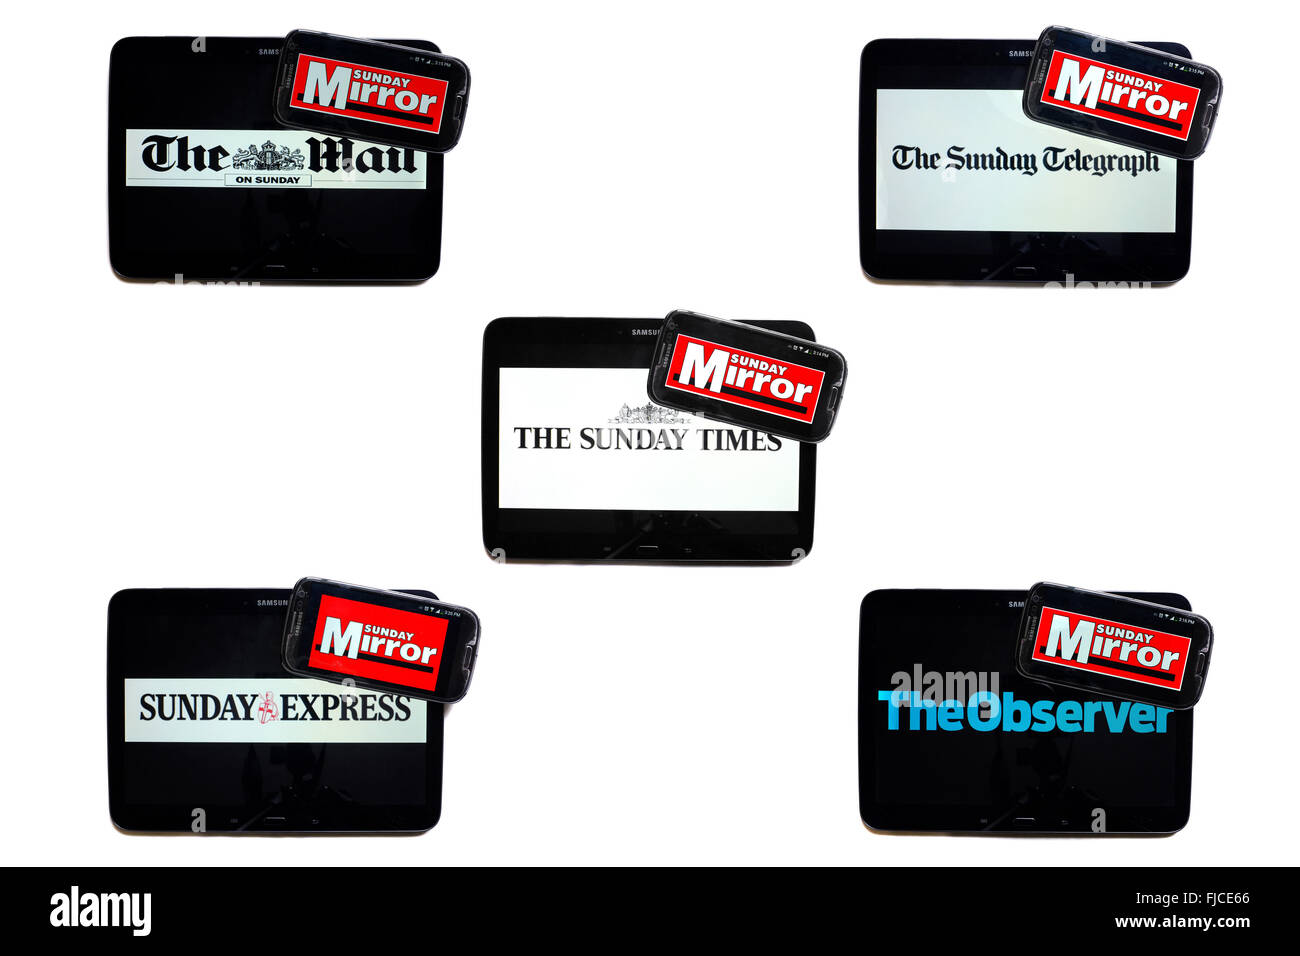 The Sunday Mirror newspaper logo on smartphone screens surrounded by tablets displaying the logos of rival Sunday newspapers. Stock Photo